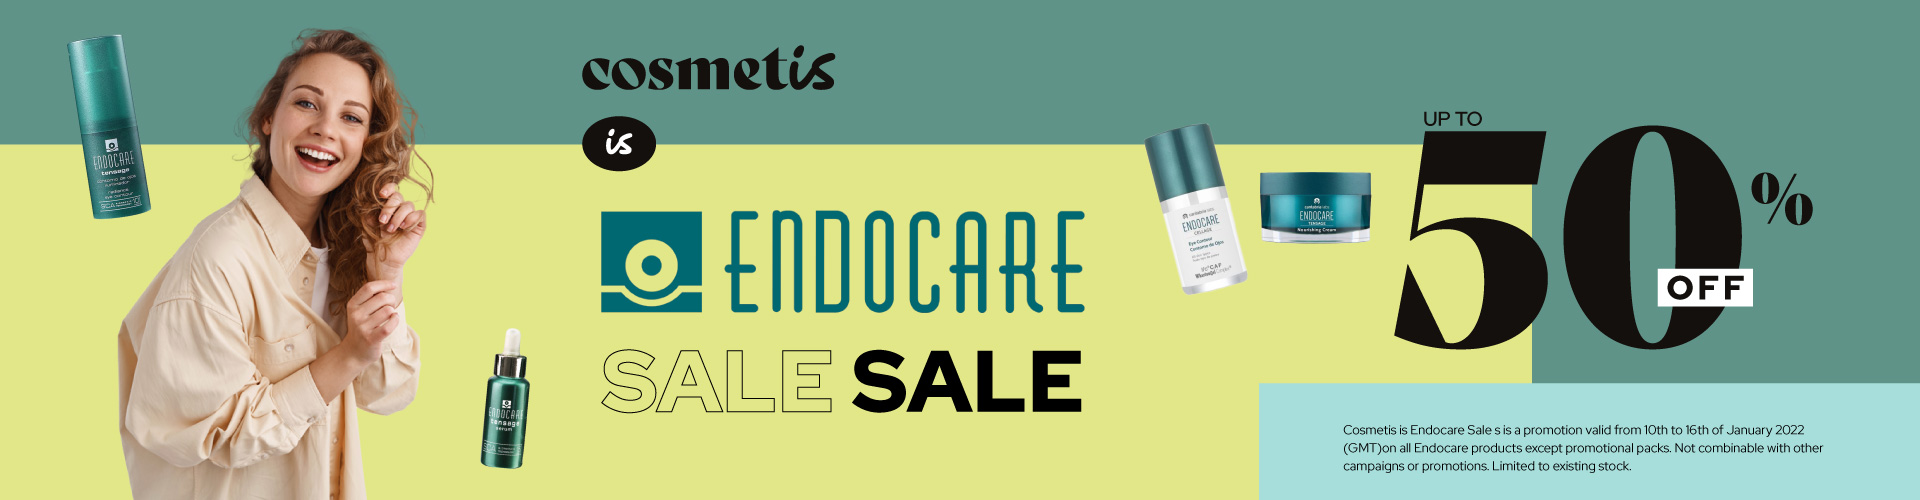 Cosmetis is Endocare Sale